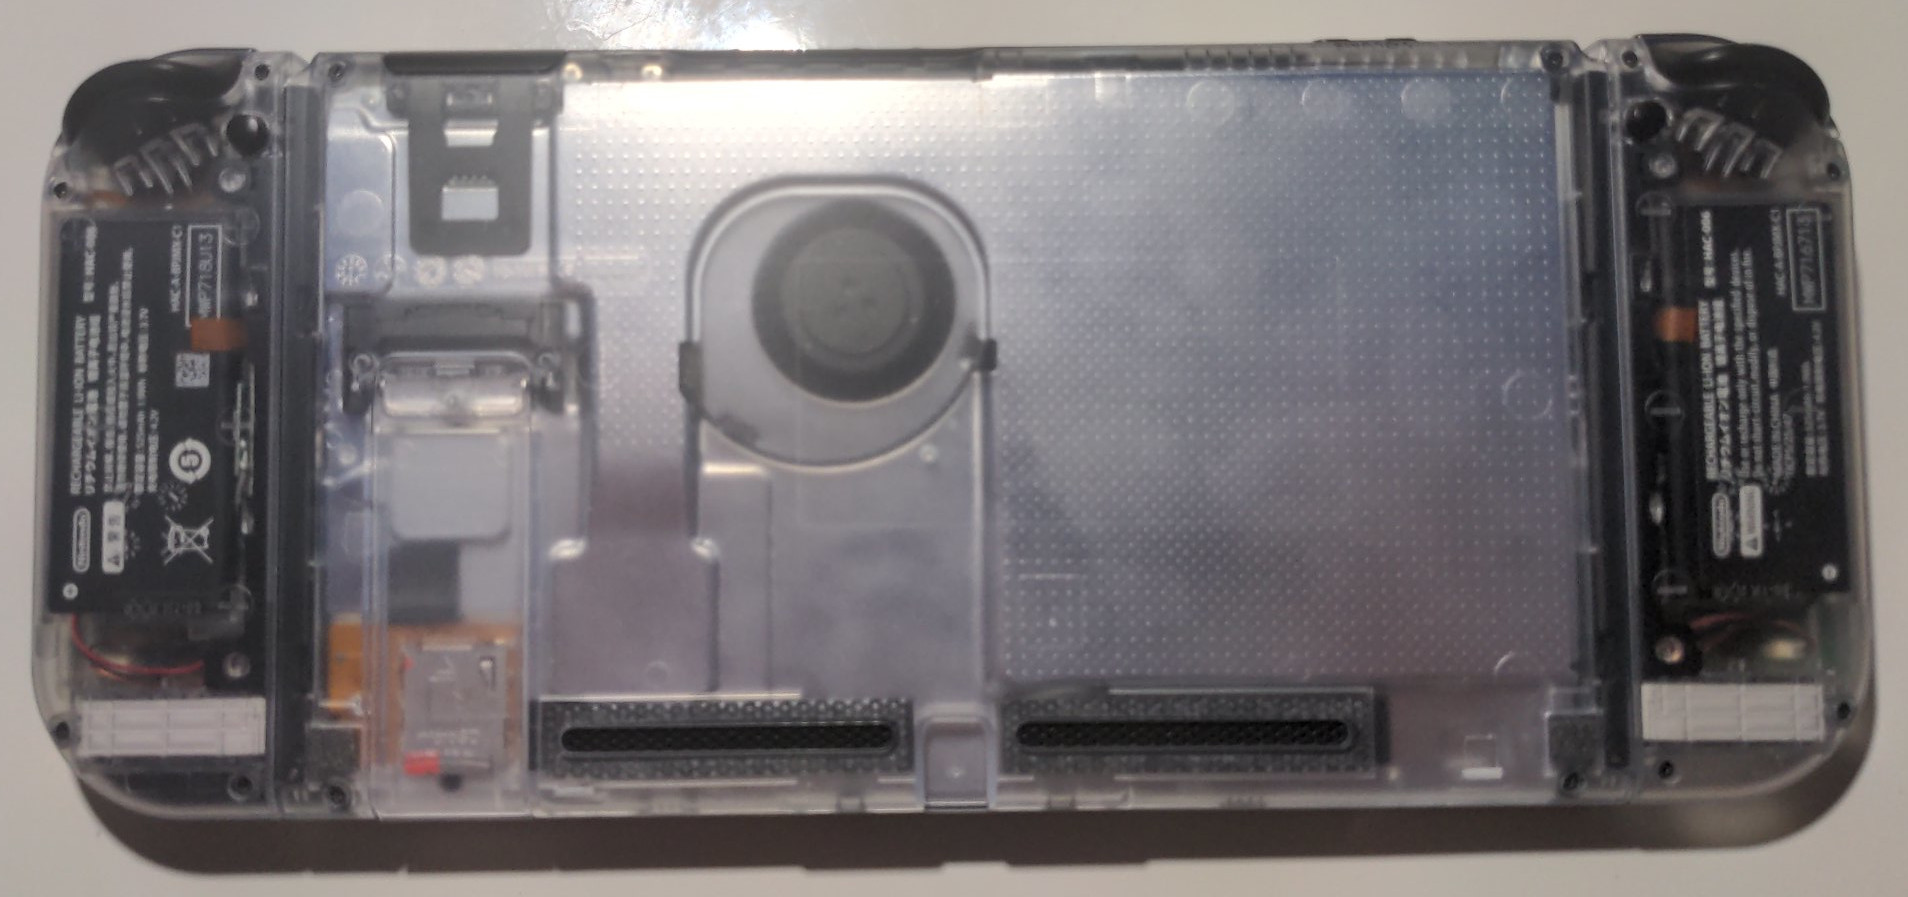 Back view of a Nintendo Switch with clear plastic shells on the joycons and console